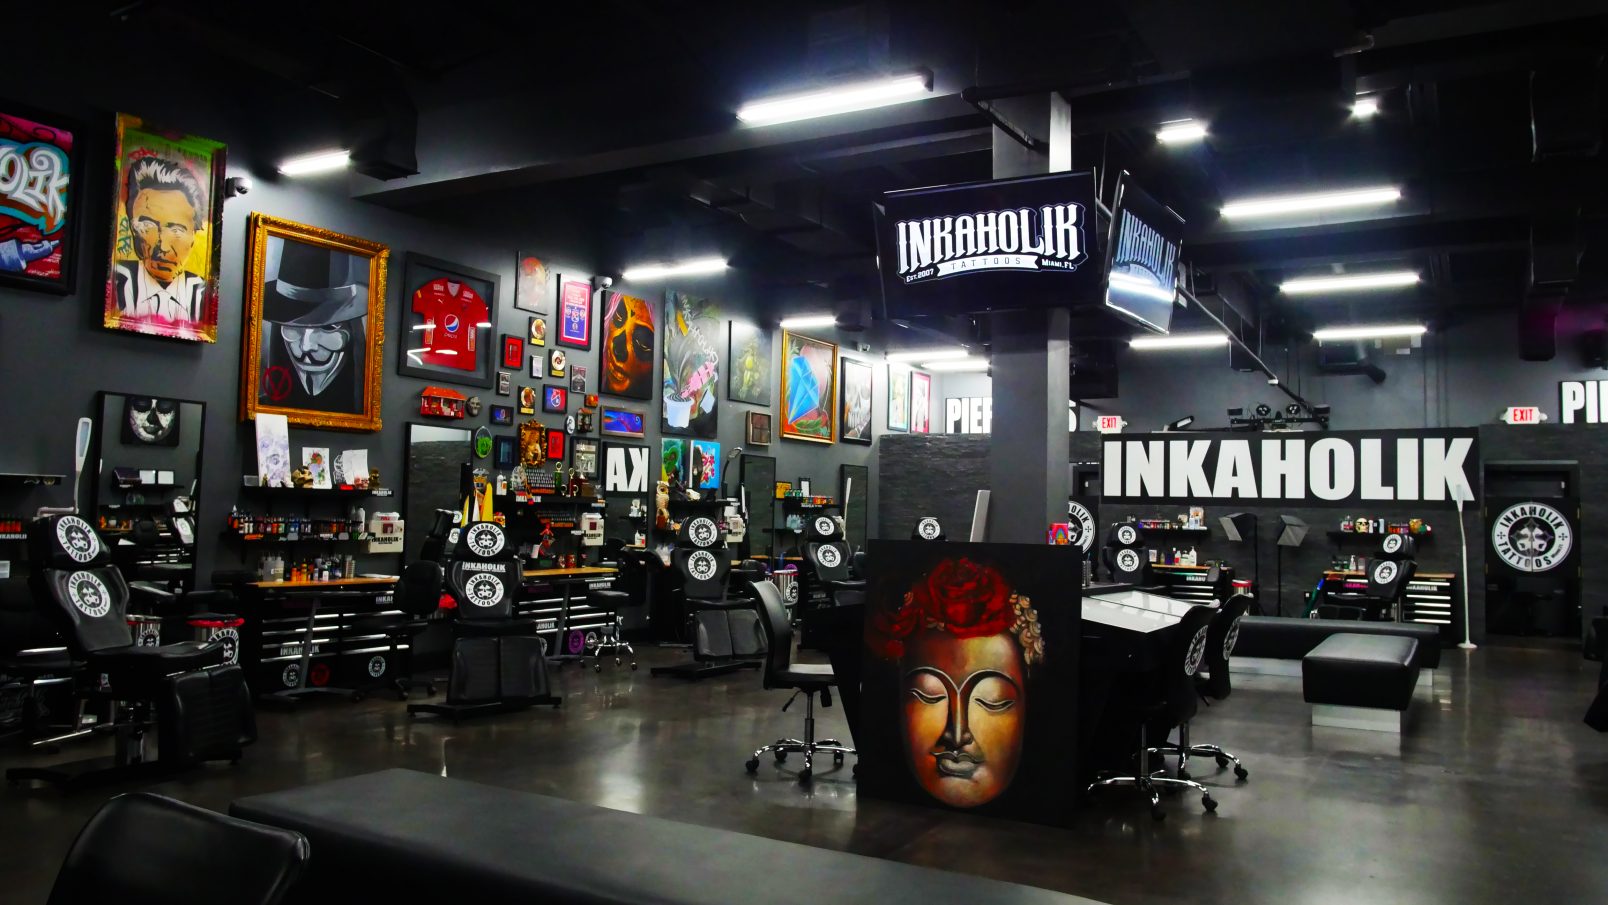 Inkaholik Tattoos Kendall 10855 Southwest 72nd Street Miami Reviews and  Appointments  GetInked